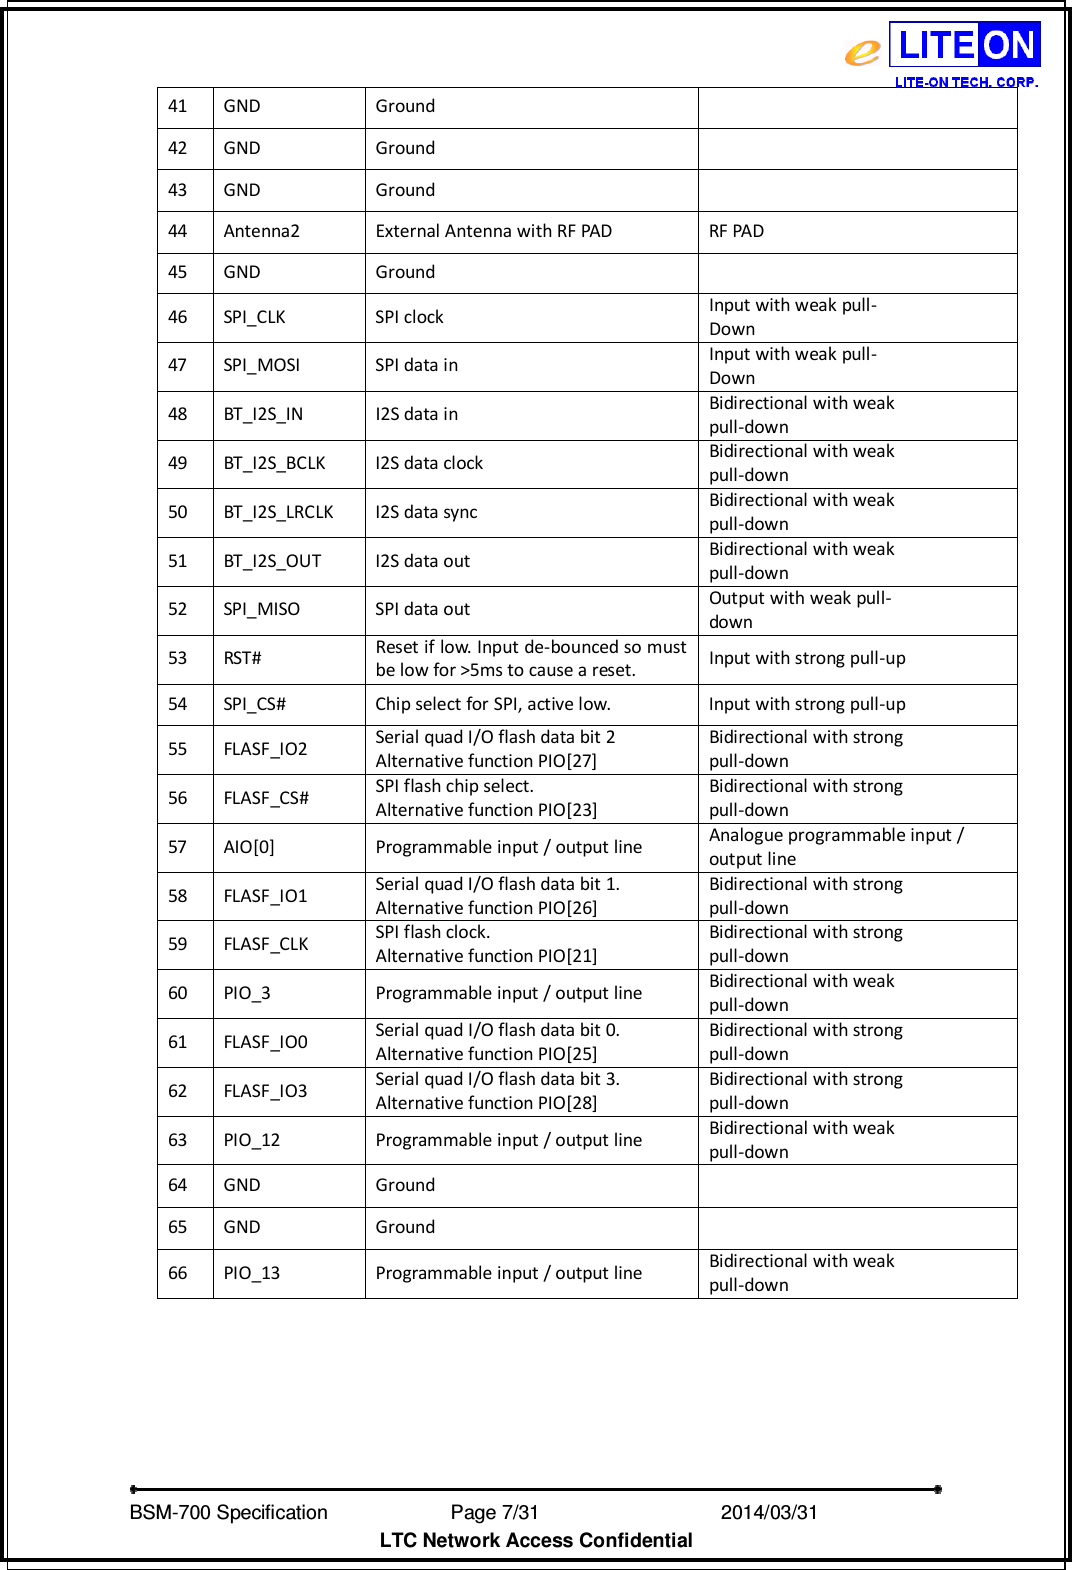   BSM-700 Specification                Page 7/31                            2014/03/31 LTC Network Access Confidential 41  GND  Ground   42  GND  Ground   43  GND  Ground   44  Antenna2  External Antenna with RF PAD  RF PAD 45  GND  Ground   46  SPI_CLK  SPI clock Input with weak pull- Down 47  SPI_MOSI  SPI data in Input with weak pull- Down 48  BT_I2S_IN  I2S data in Bidirectional with weak pull-down 49  BT_I2S_BCLK  I2S data clock Bidirectional with weak pull-down 50  BT_I2S_LRCLK  I2S data sync Bidirectional with weak pull-down 51  BT_I2S_OUT  I2S data out Bidirectional with weak pull-down 52  SPI_MISO  SPI data out Output with weak pull- down 53  RST# Reset if low. Input de-bounced so must be low for &gt;5ms to cause a reset.  Input with strong pull-up 54  SPI_CS#  Chip select for SPI, active low.  Input with strong pull-up 55  FLASF_IO2 Serial quad I/O flash data bit 2 Alternative function PIO[27] Bidirectional with strong pull-down 56  FLASF_CS# SPI flash chip select. Alternative function PIO[23] Bidirectional with strong pull-down 57  AIO[0]  Programmable input / output line Analogue programmable input / output line 58  FLASF_IO1 Serial quad I/O flash data bit 1. Alternative function PIO[26] Bidirectional with strong pull-down 59  FLASF_CLK SPI flash clock. Alternative function PIO[21] Bidirectional with strong pull-down 60  PIO_3  Programmable input / output line Bidirectional with weak pull-down 61  FLASF_IO0 Serial quad I/O flash data bit 0. Alternative function PIO[25] Bidirectional with strong pull-down 62  FLASF_IO3 Serial quad I/O flash data bit 3. Alternative function PIO[28] Bidirectional with strong pull-down 63  PIO_12  Programmable input / output line Bidirectional with weak pull-down 64  GND  Ground   65  GND  Ground   66  PIO_13  Programmable input / output line Bidirectional with weak pull-down     